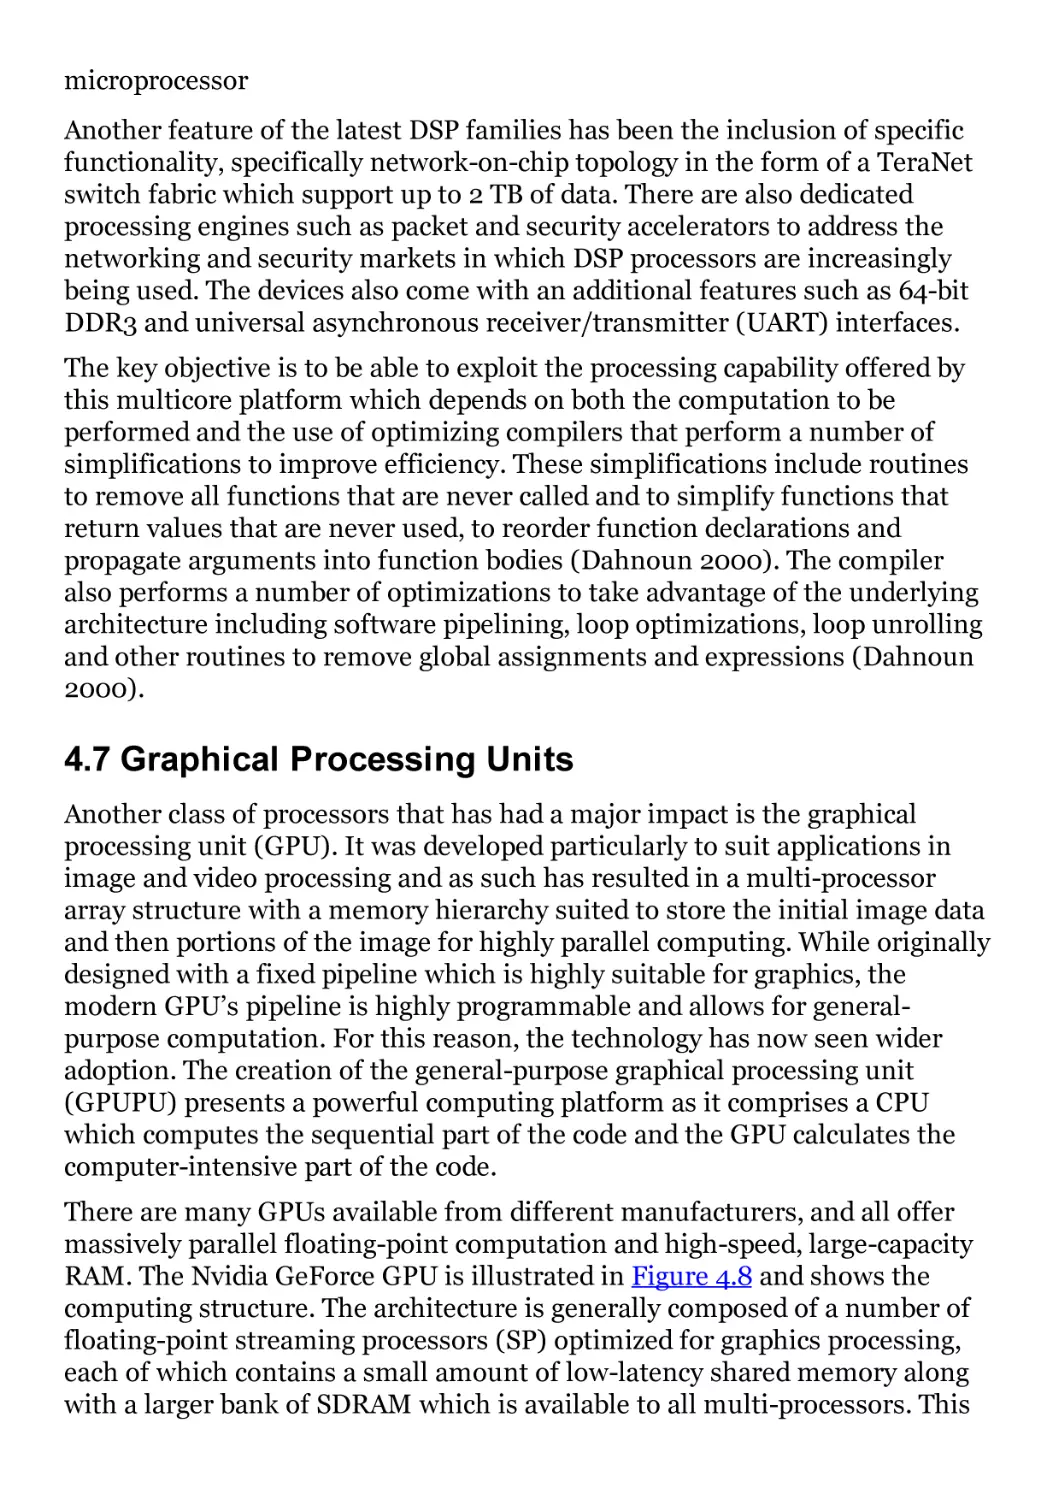 4.7 Graphical Processing Units